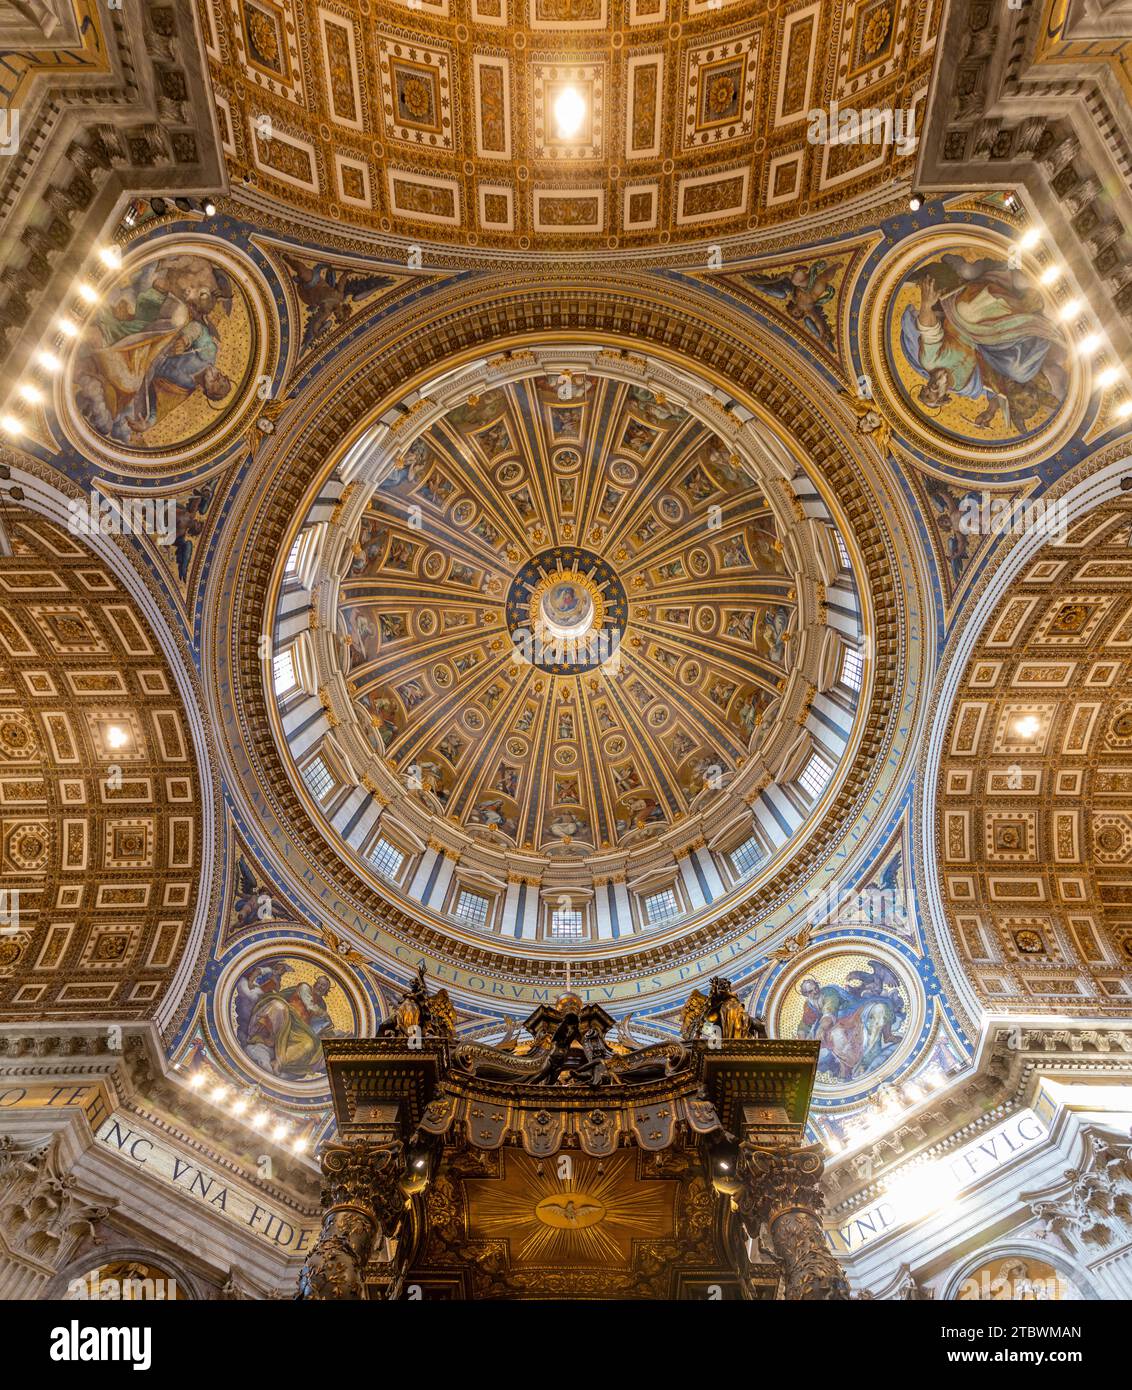 A picture of the huge dome of the St. Peter's Basilica, the altar and the surrounding frescoes and architecture as seen from the inside Stock Photo